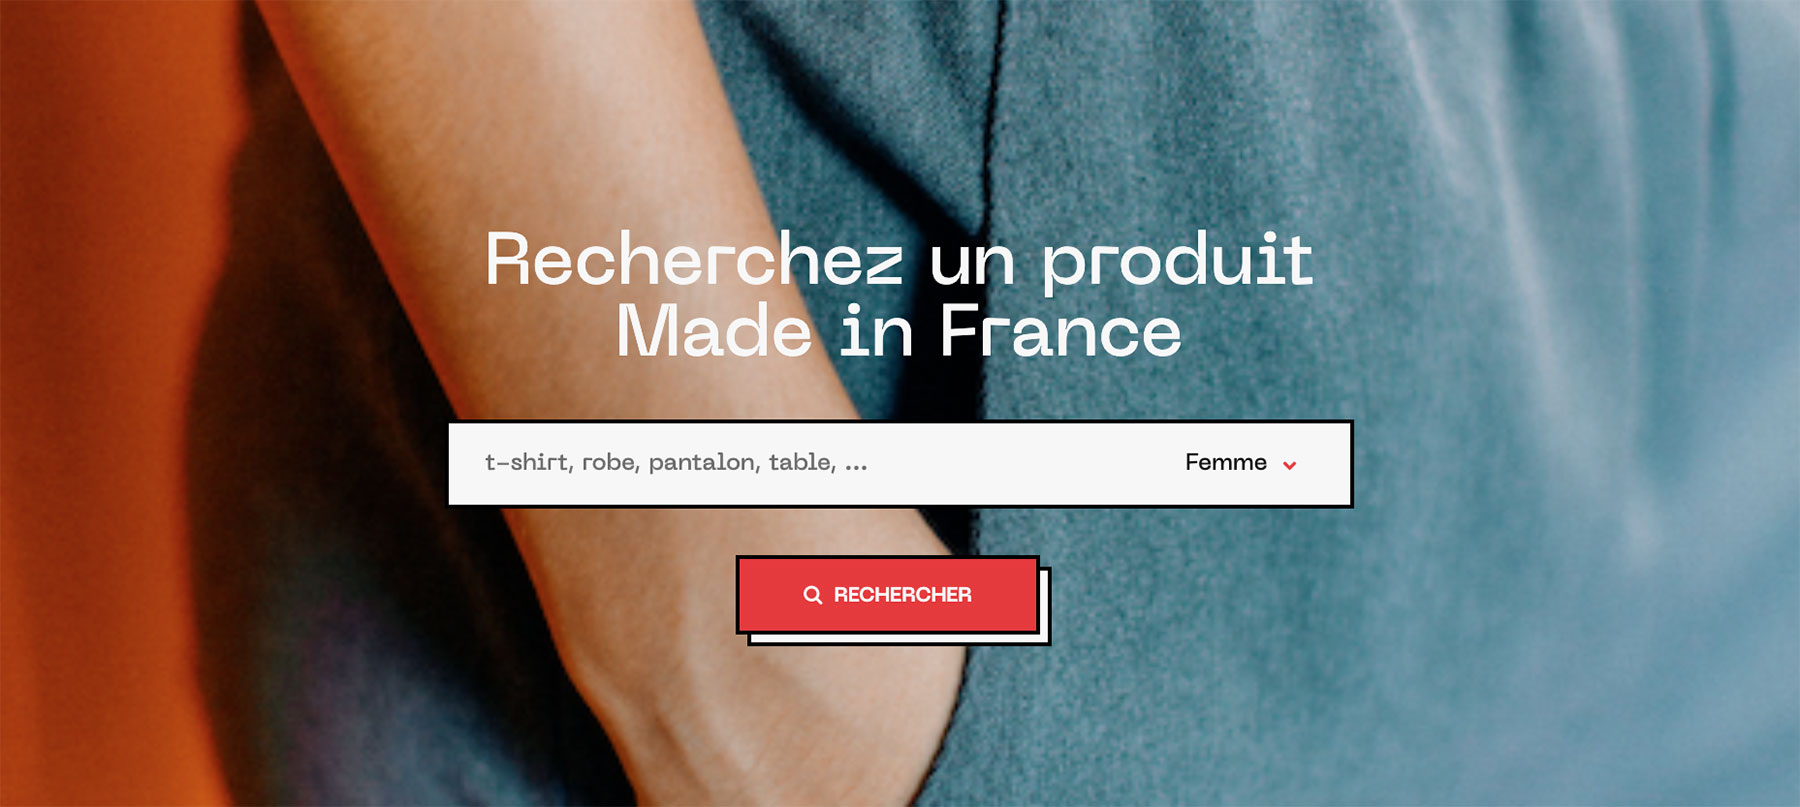 Le site du made in France